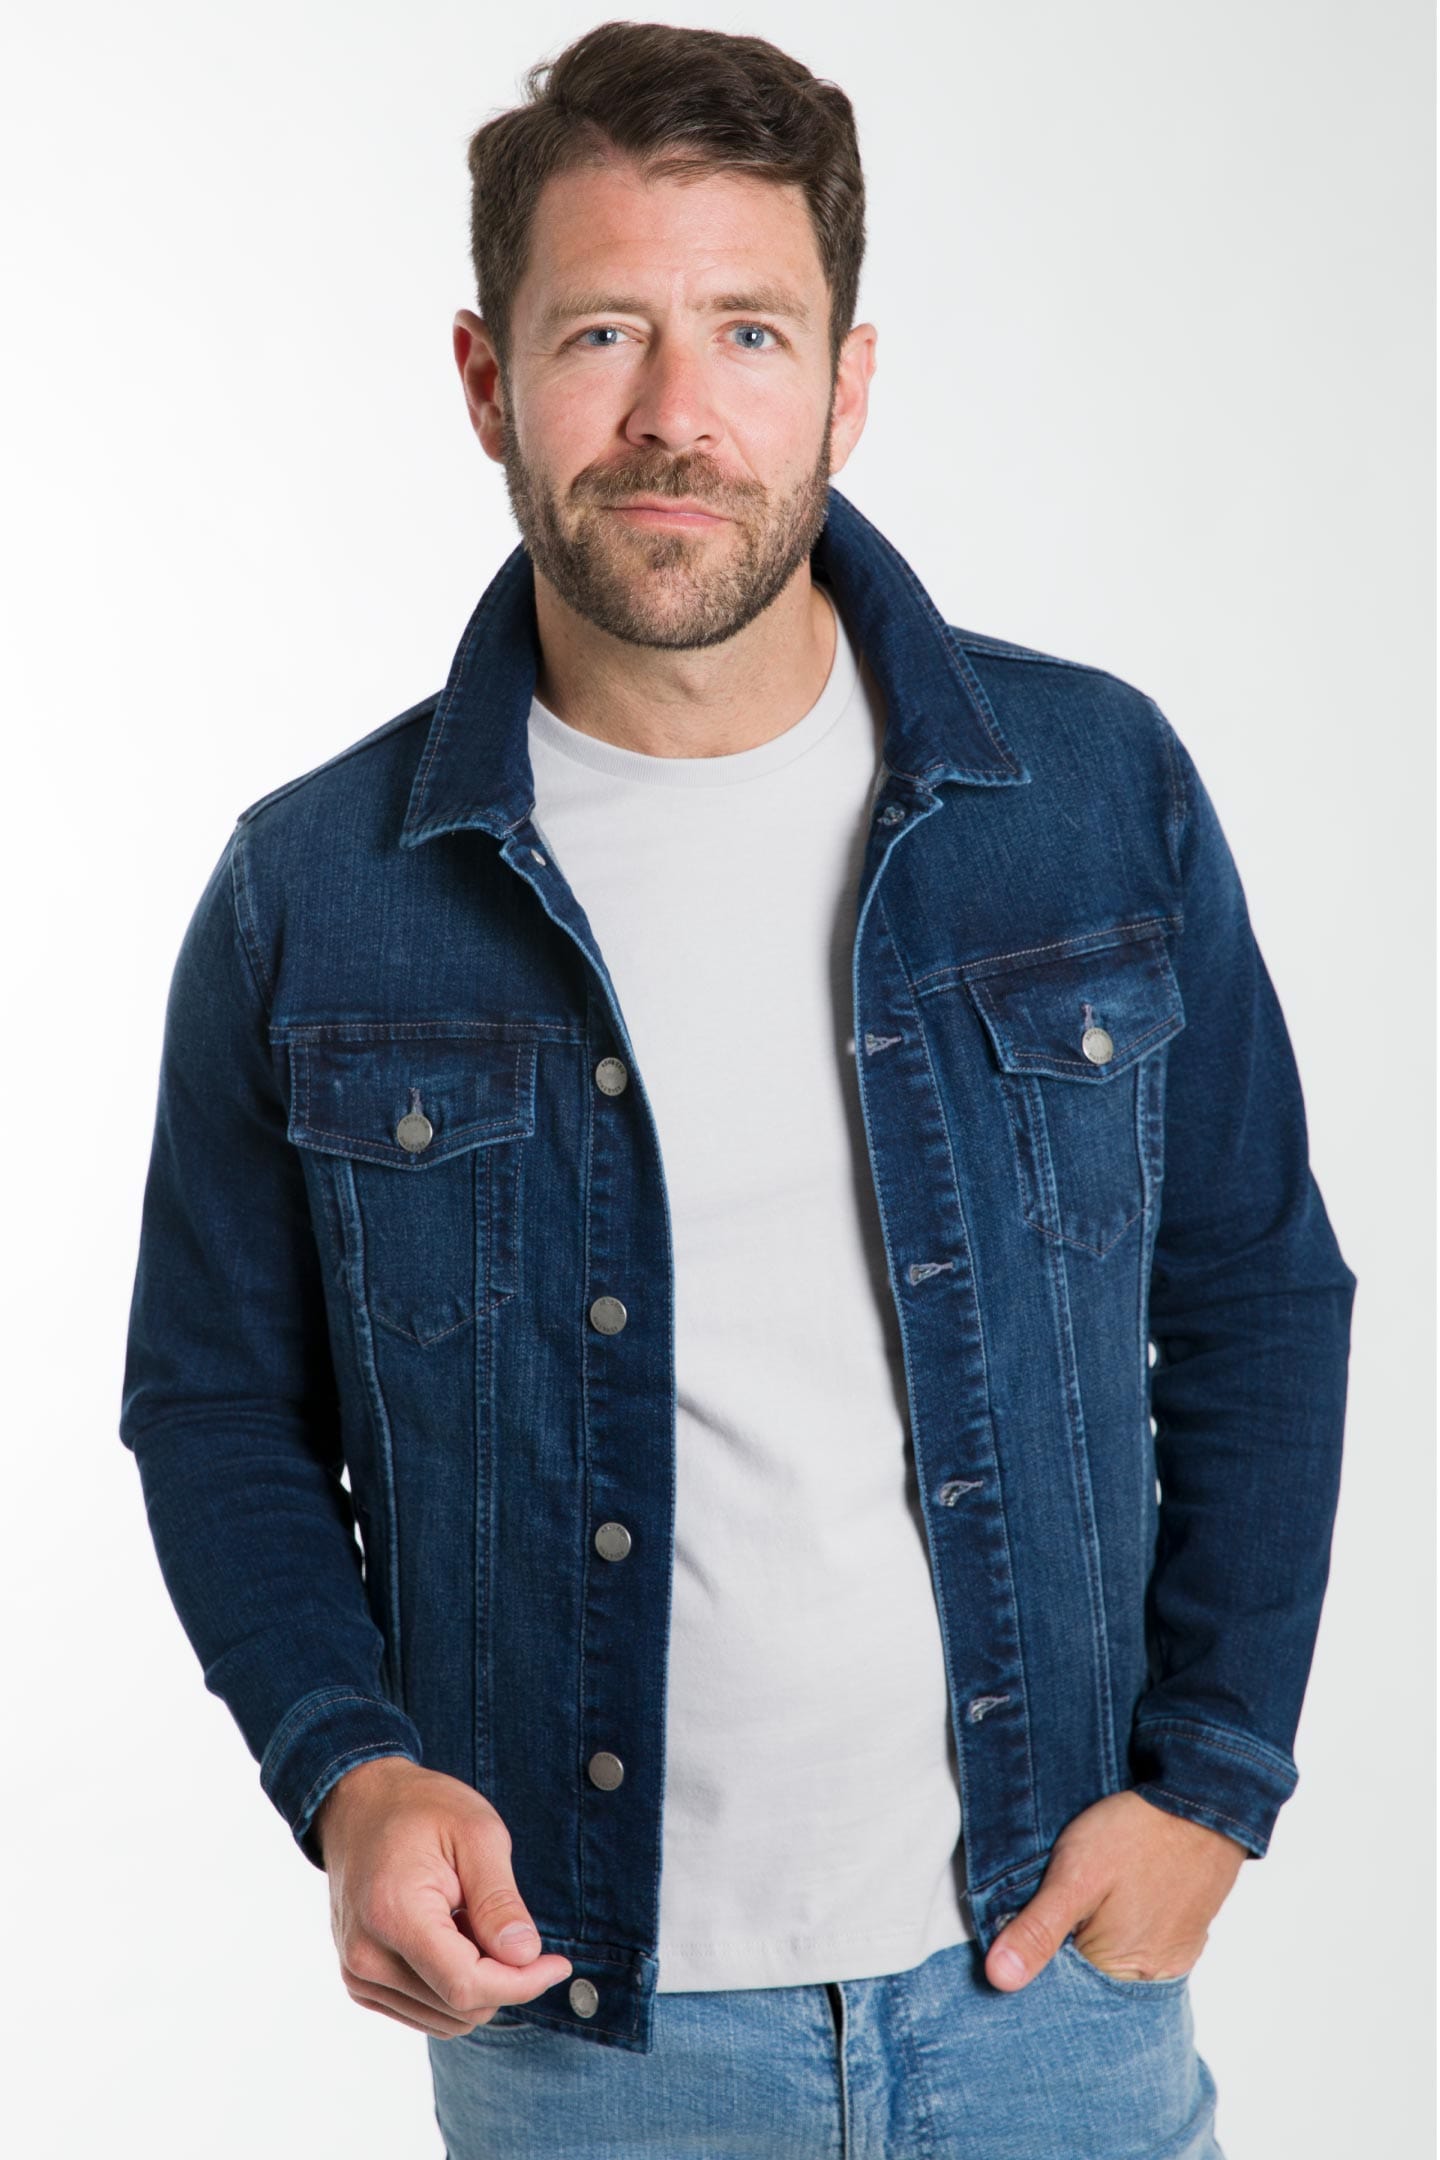 ZCJUX Spring and Autumn Men's Short Denim Jacket Thin Section Young and  Middle-Aged Slim Fit Men's Jacket (Color : A, Size : 190 Code) : Amazon.ca:  Clothing, Shoes & Accessories